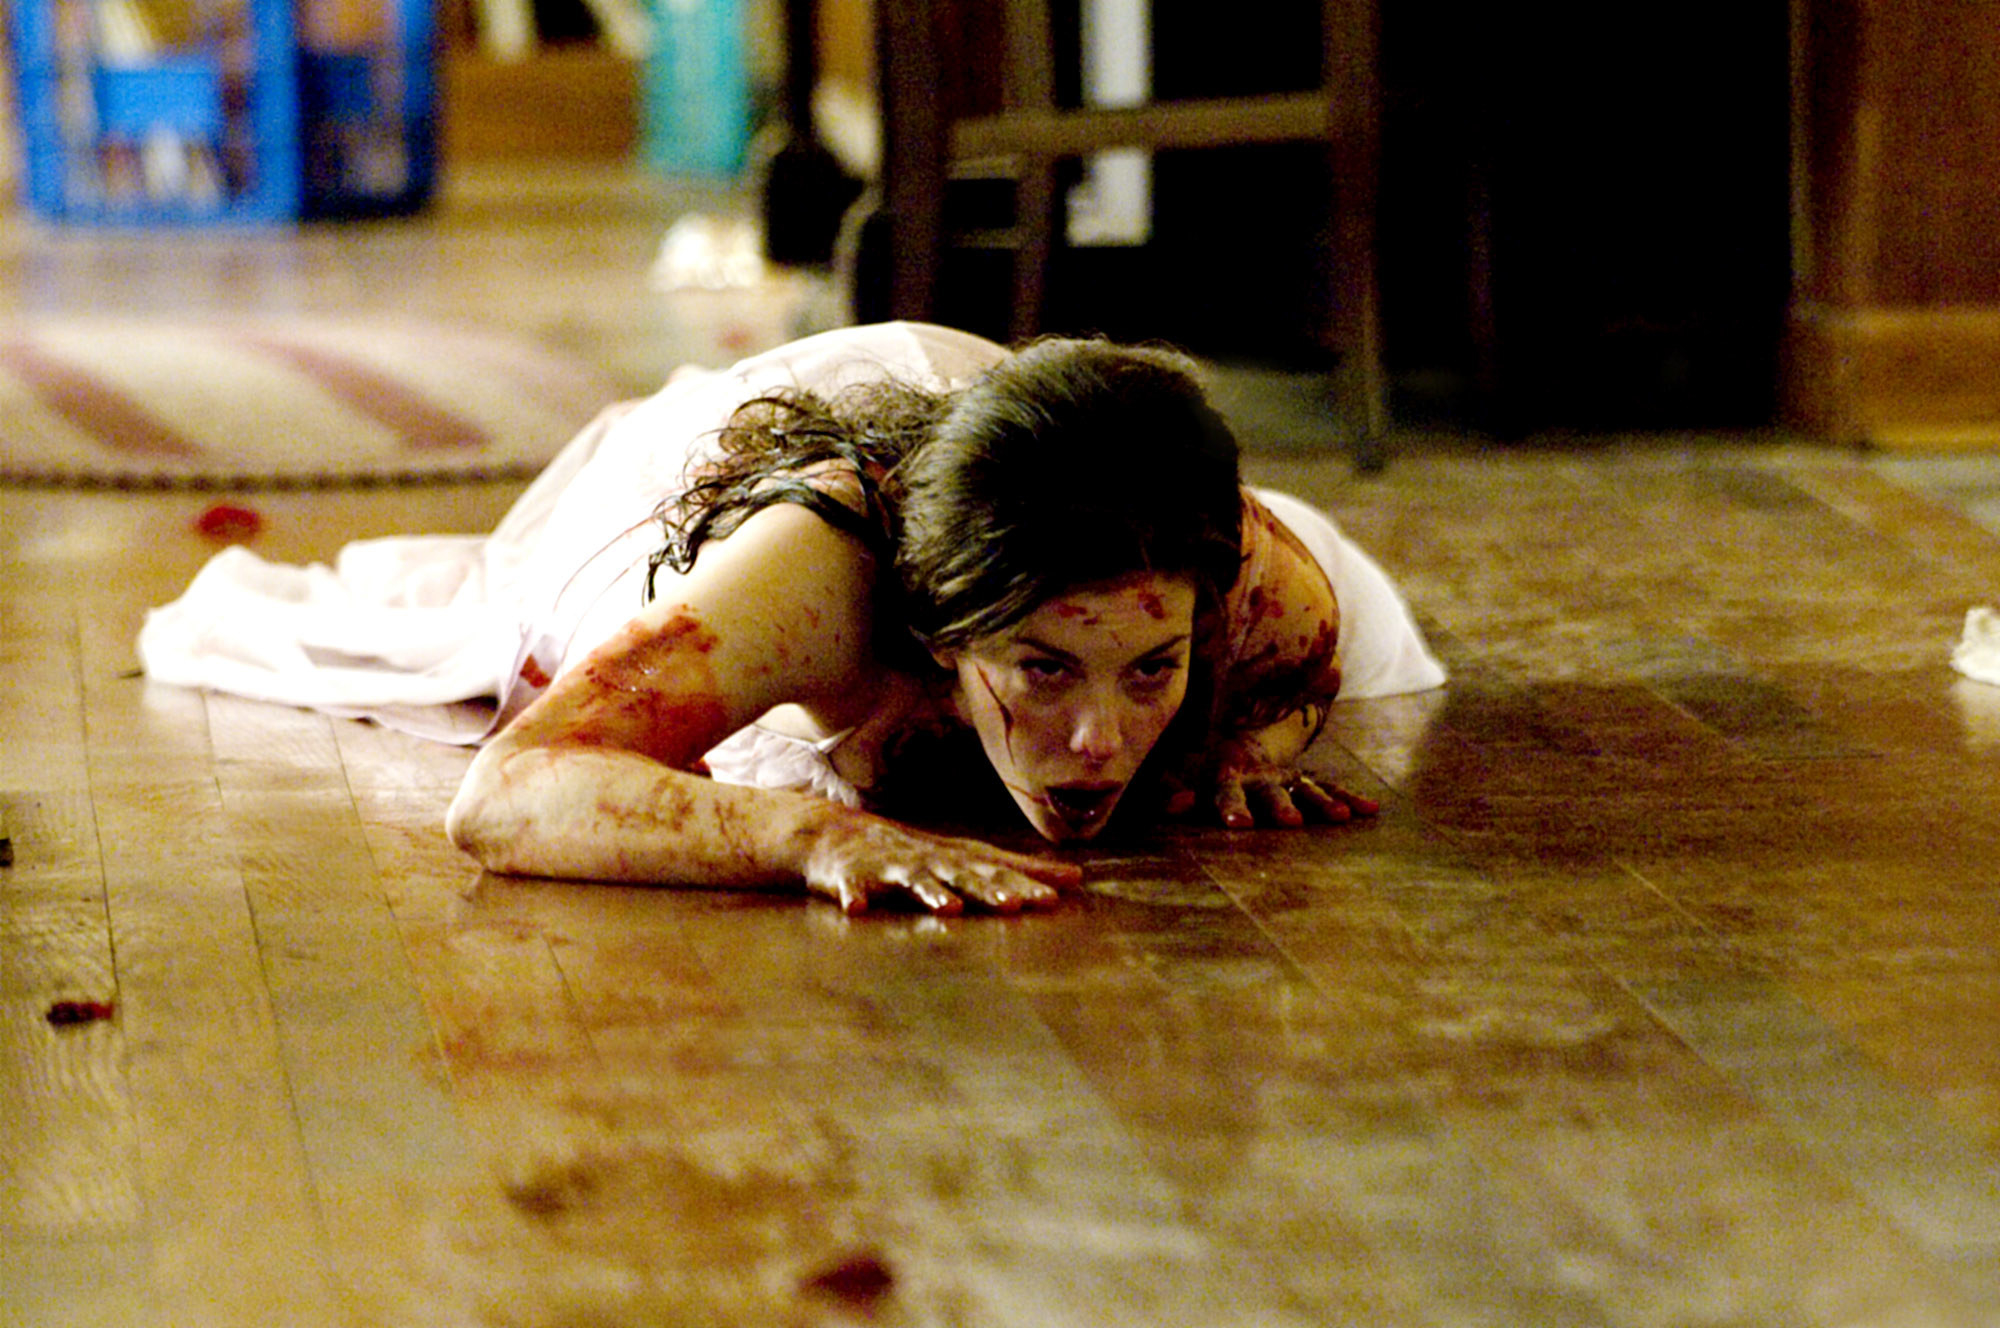 A bloodied woman crawls on the floor